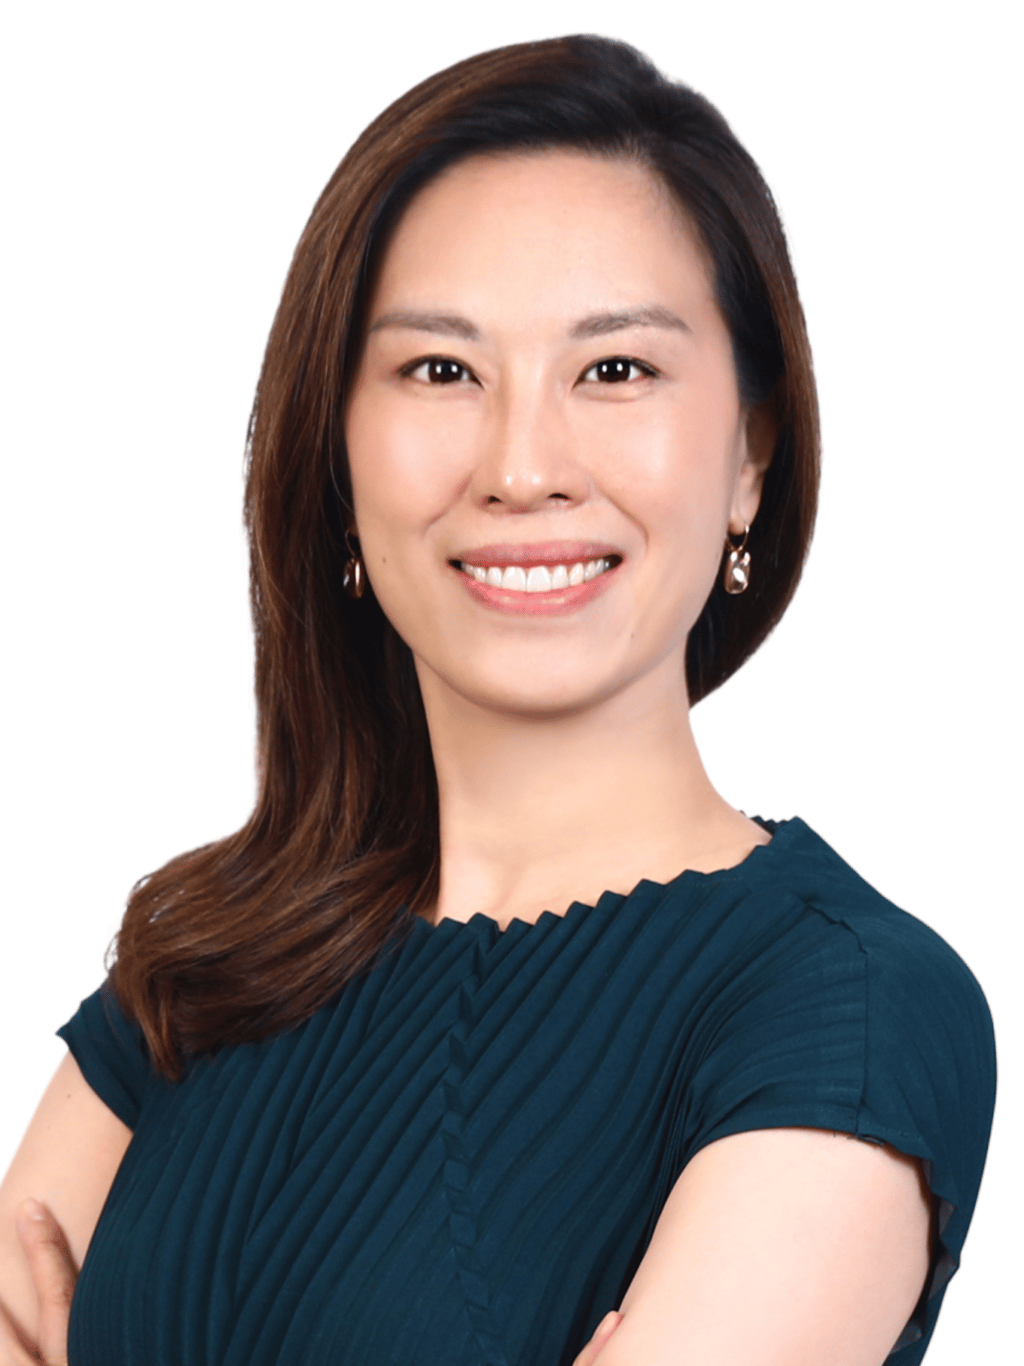 Dr Elaine Ng was born and raised in Auckland, New Zealand. After relocating to Singapore in 1997 she trained as a dentist and worked in both public and private sectors.